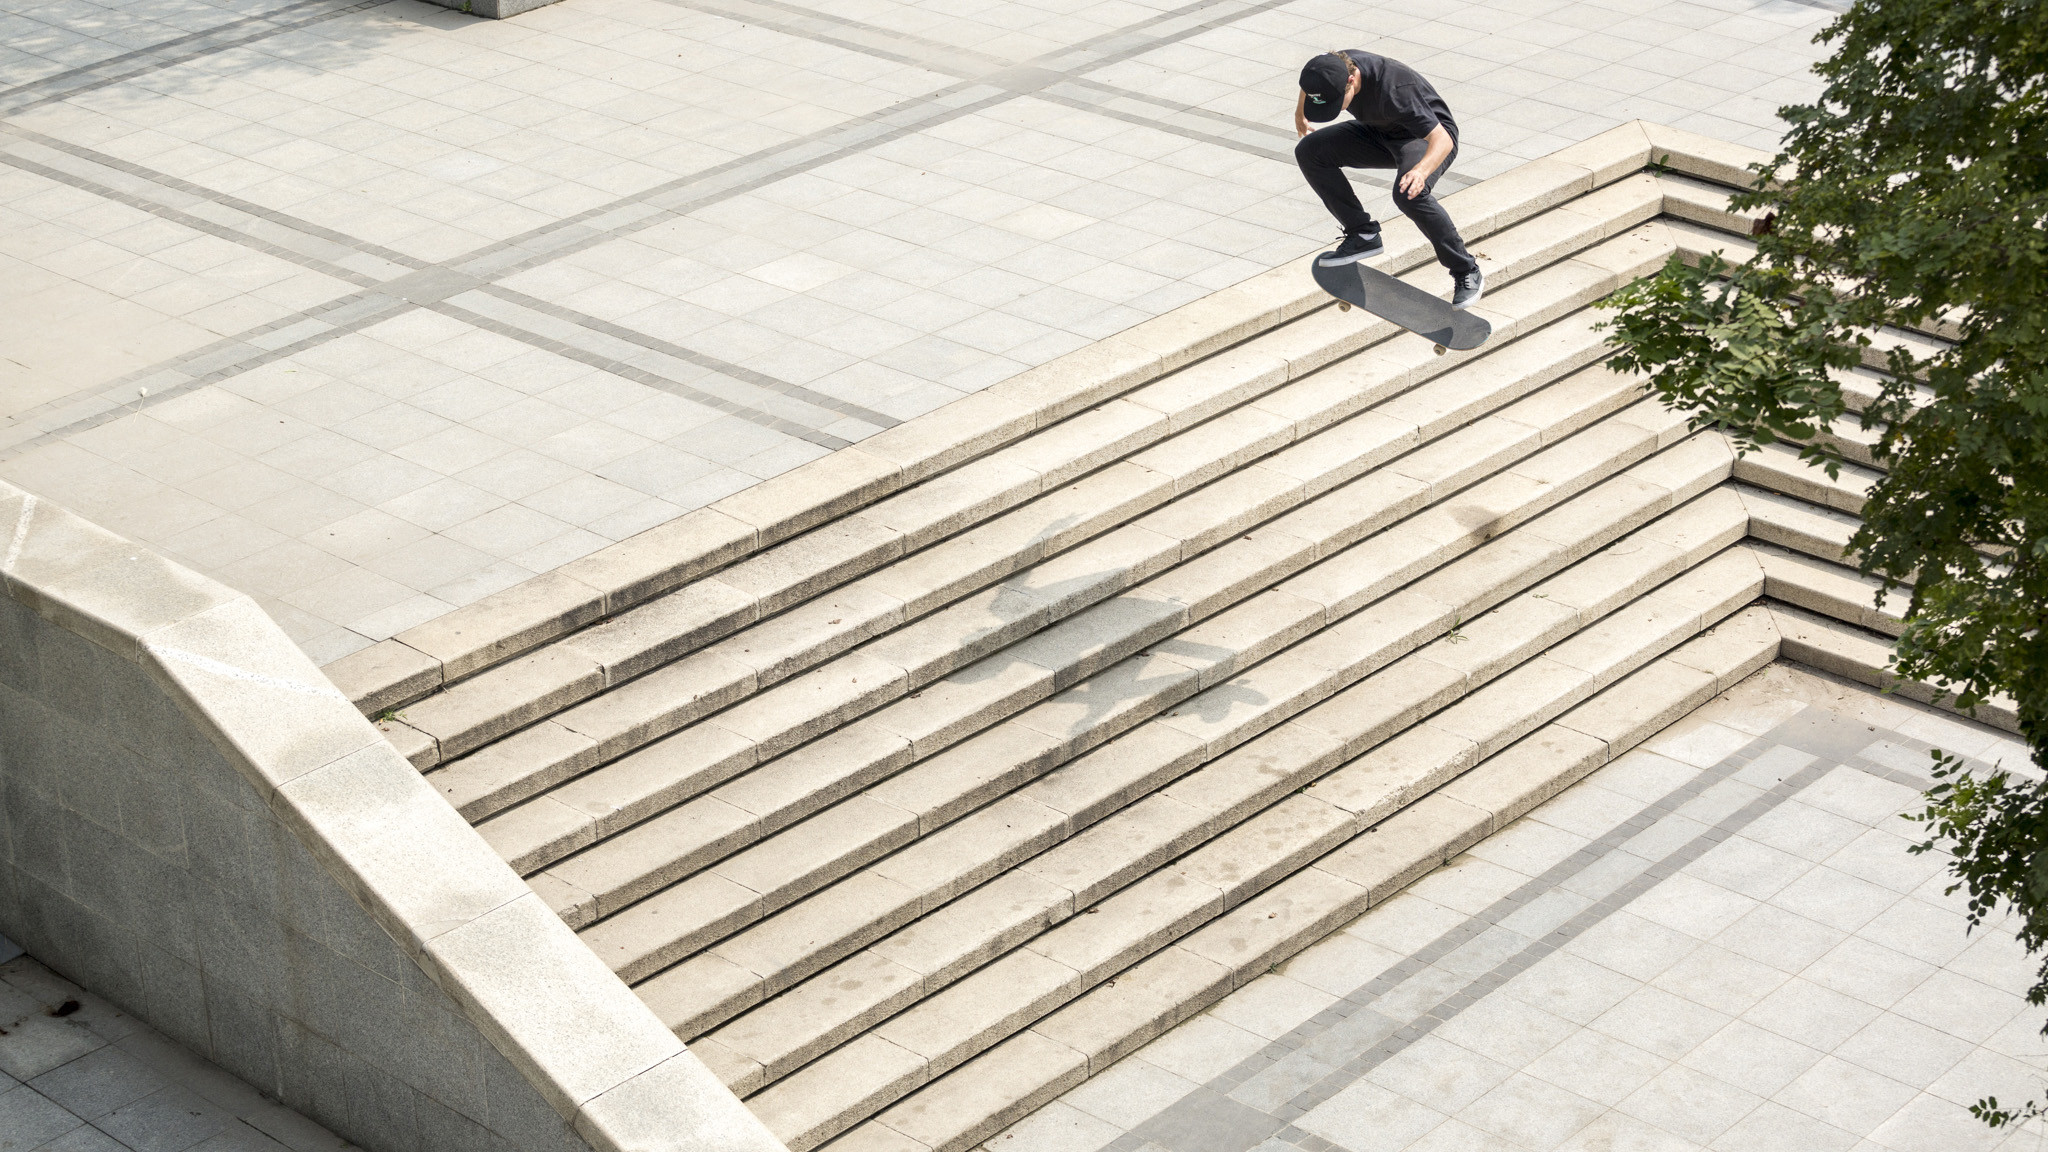 2048x1152 Shane O'Neill, switch flip during filming for Nike SB Chronicles Volume 2.